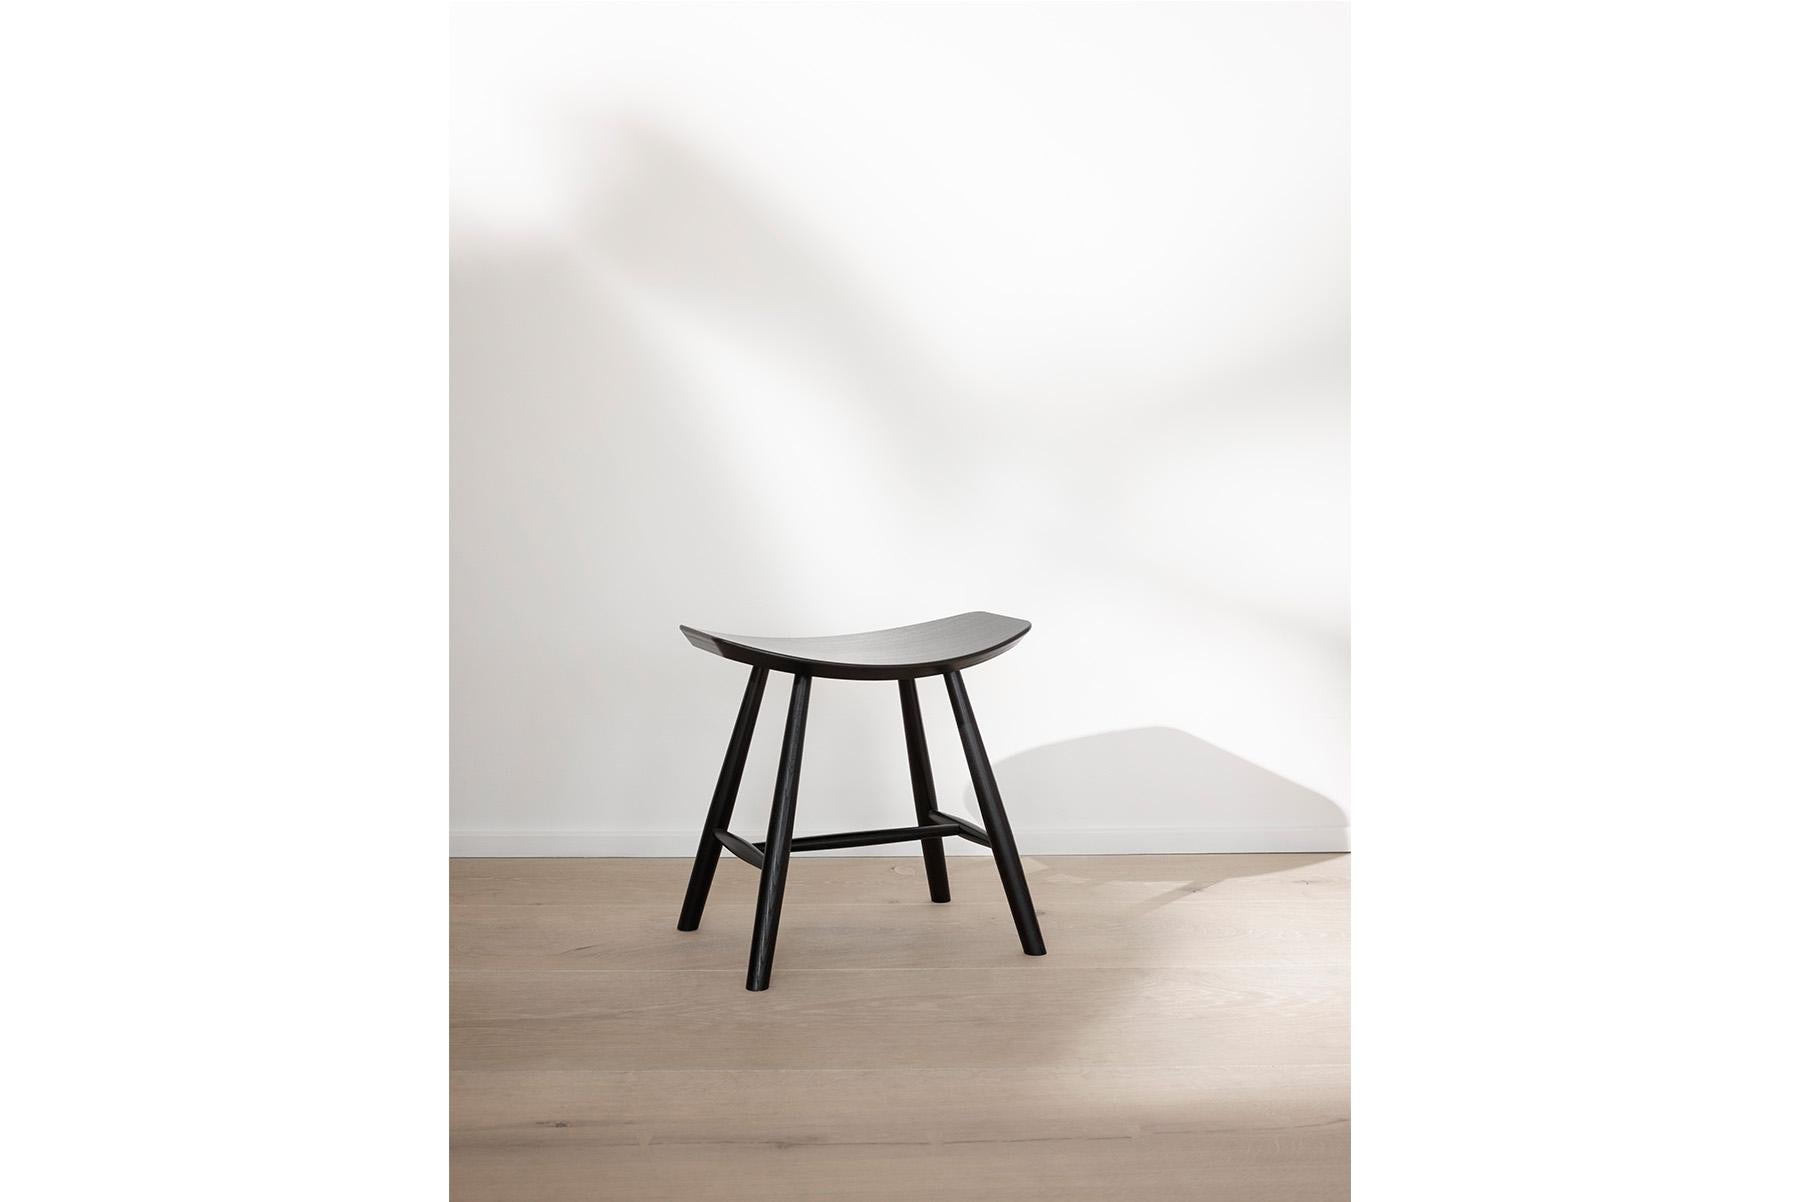 Ejvind A Johansson J63 Stool A Classic wooden stool that can be used together with the J63 atool, next to a bed or as an occasional seat for guests in a smaller kitchen or living room.